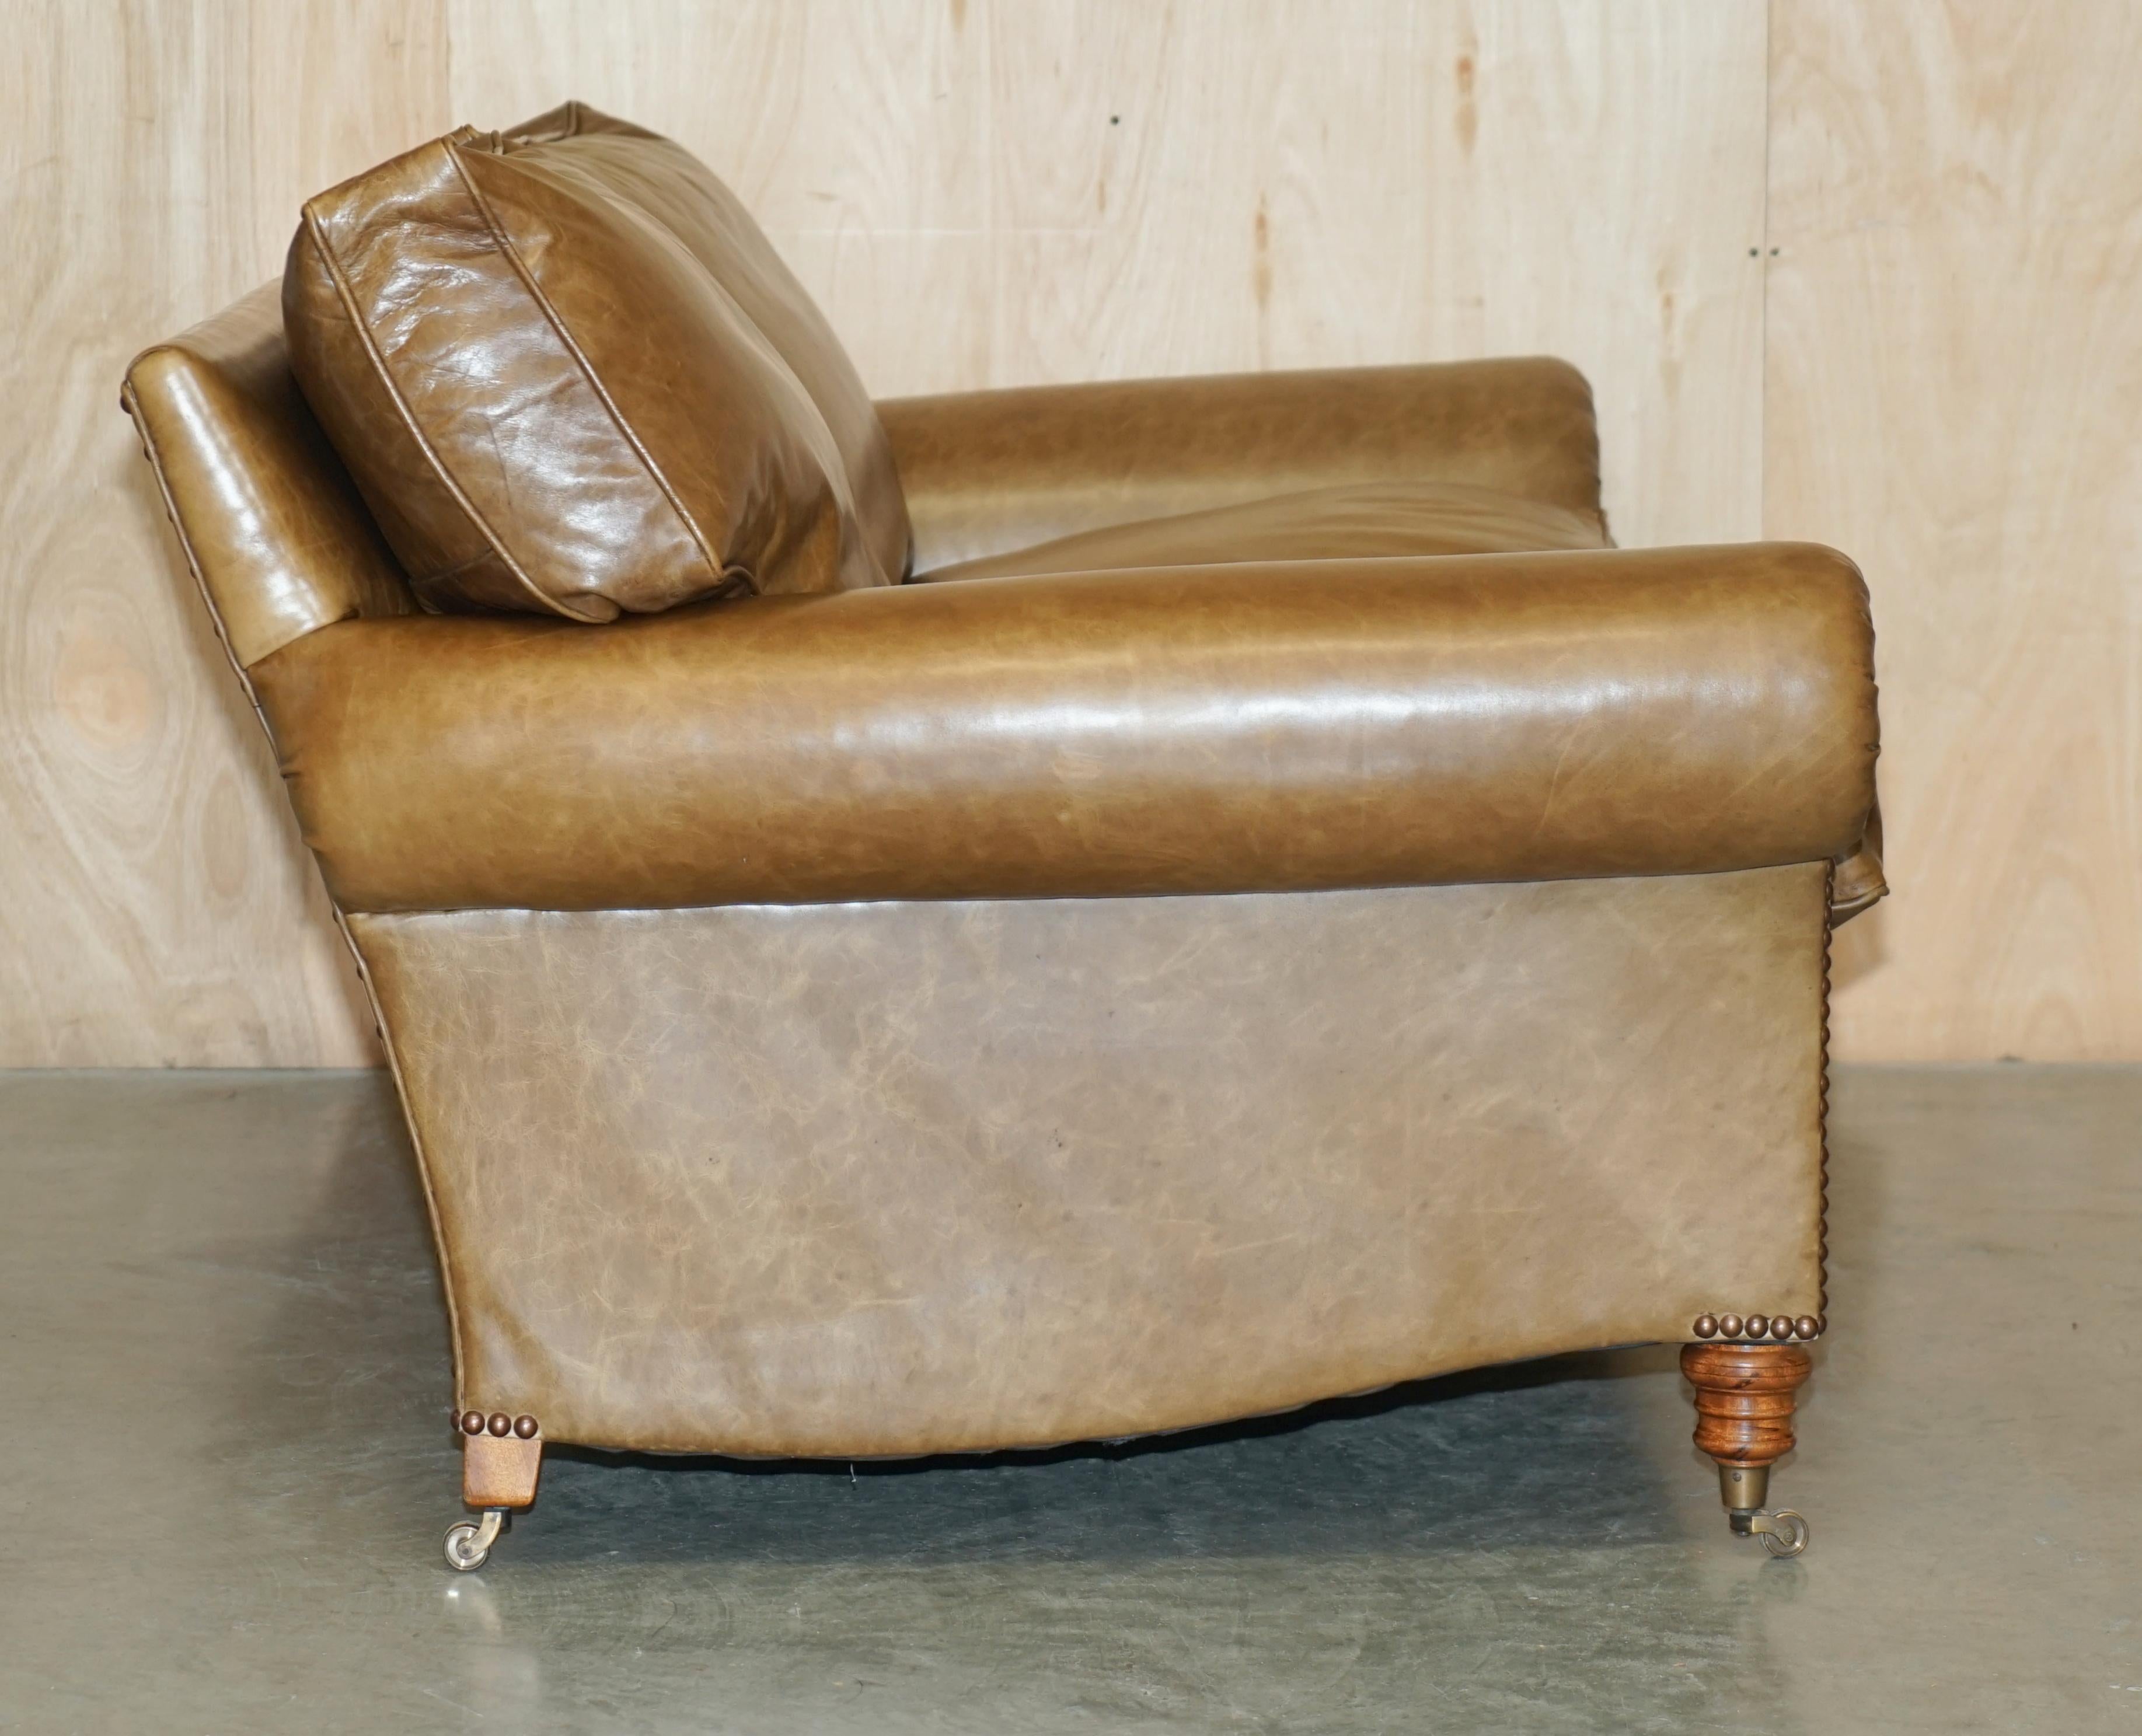 LOVELY GEORGE SMITH FULL SCROLL ARM CUSHiON BACK BROWN LEATHER SOFA For Sale 7